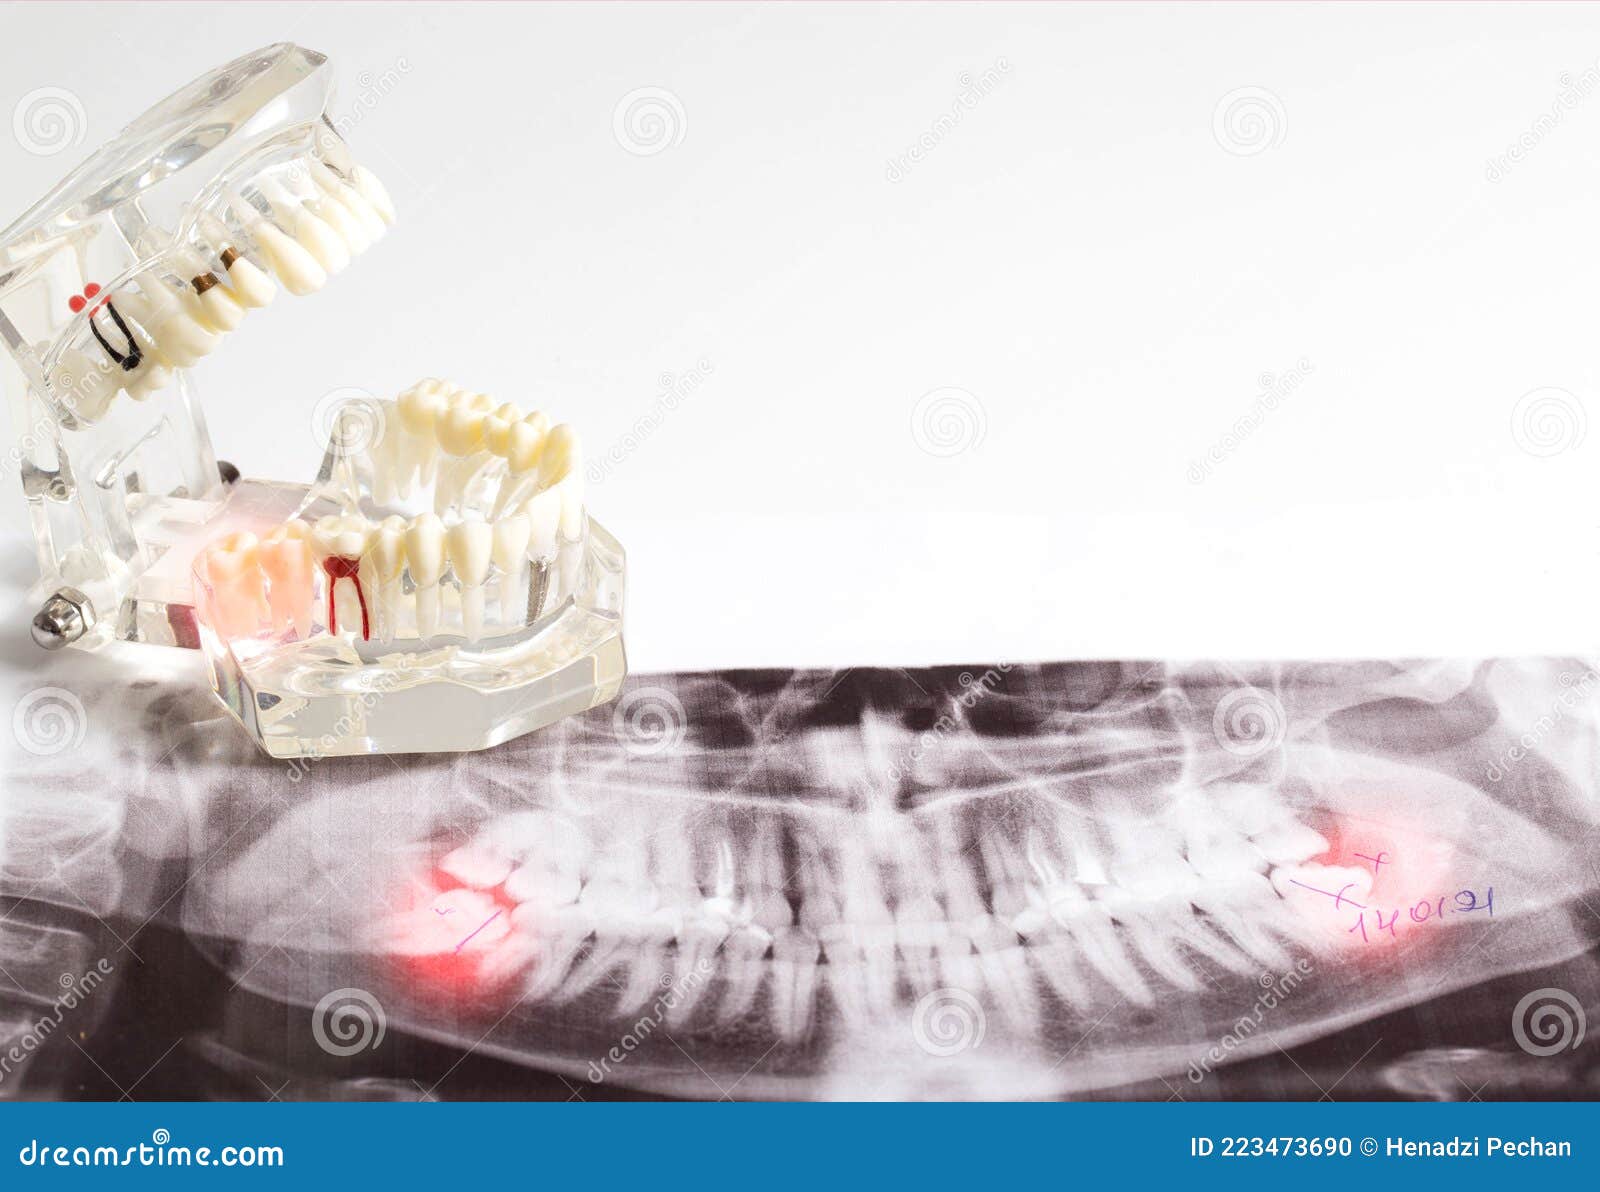 Impacted Wisdom Teeth On An X Ray Picture With An Inflamed Cyst